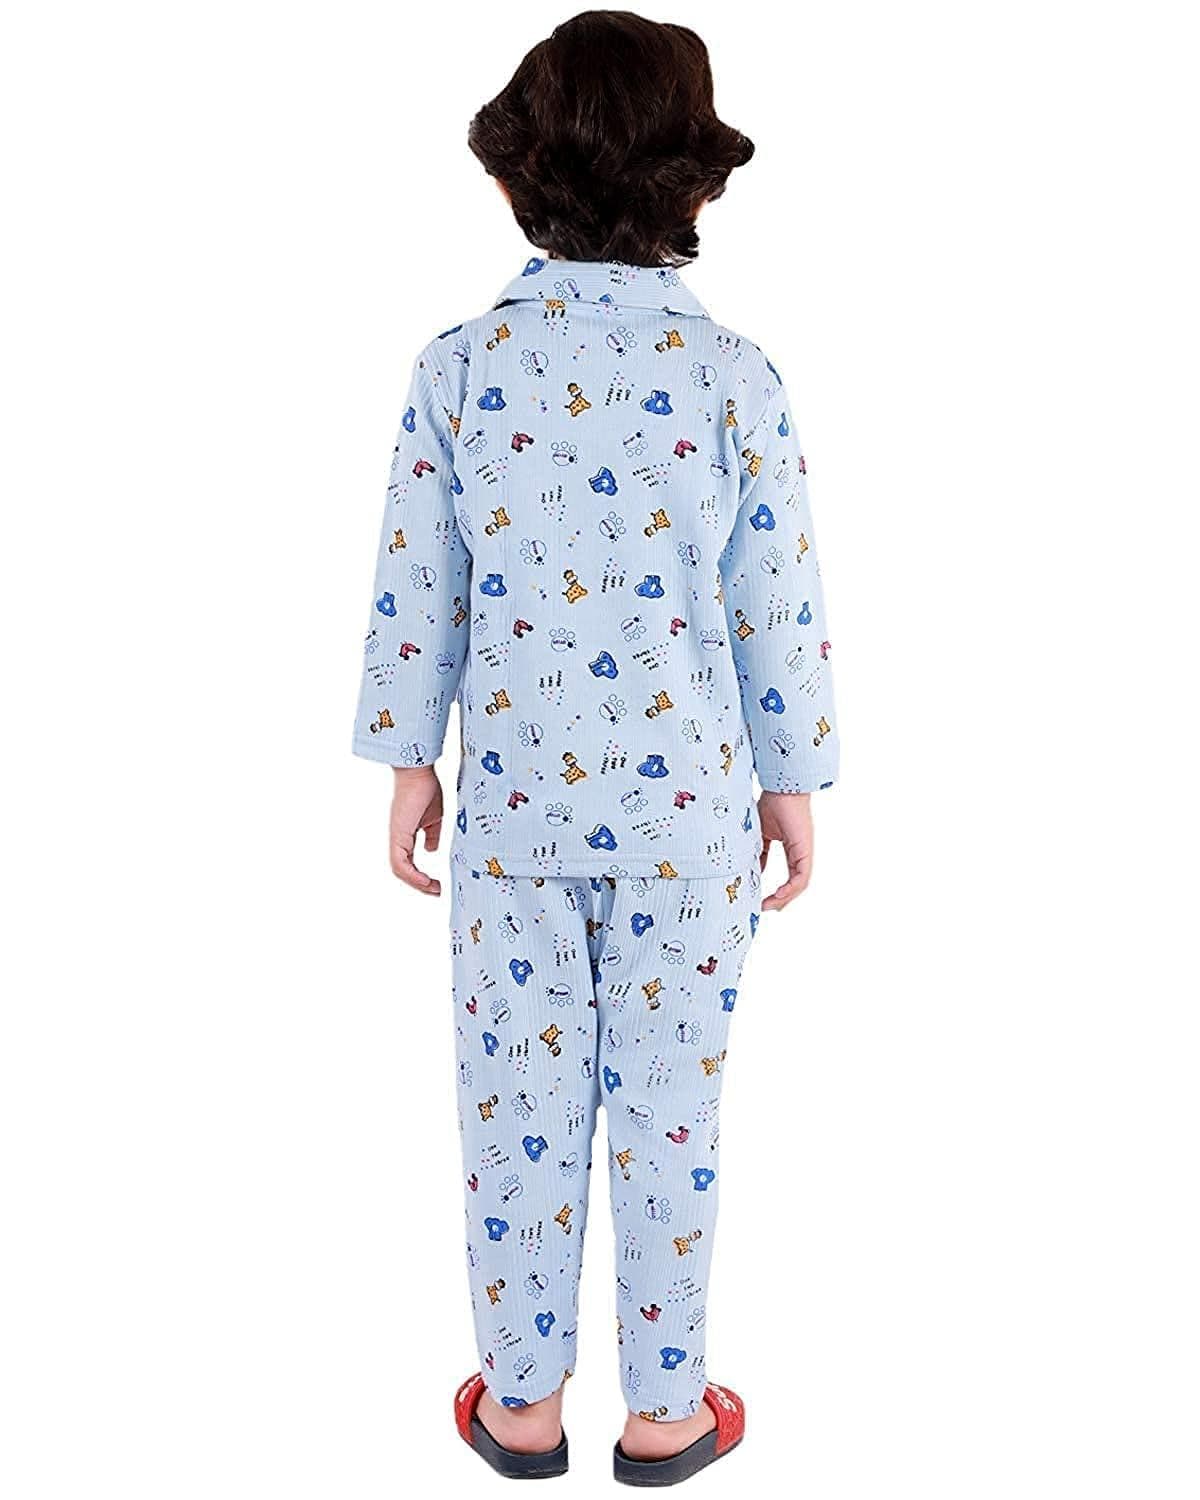 Kids and BEBS Baby Boy and Baby Girls Sleepwear Night Suit, Night Wear, Top & Pajama Set Full Sleeve with Pockets for Girls with Buttons (5 Years- 6 Years) - halfpeapp